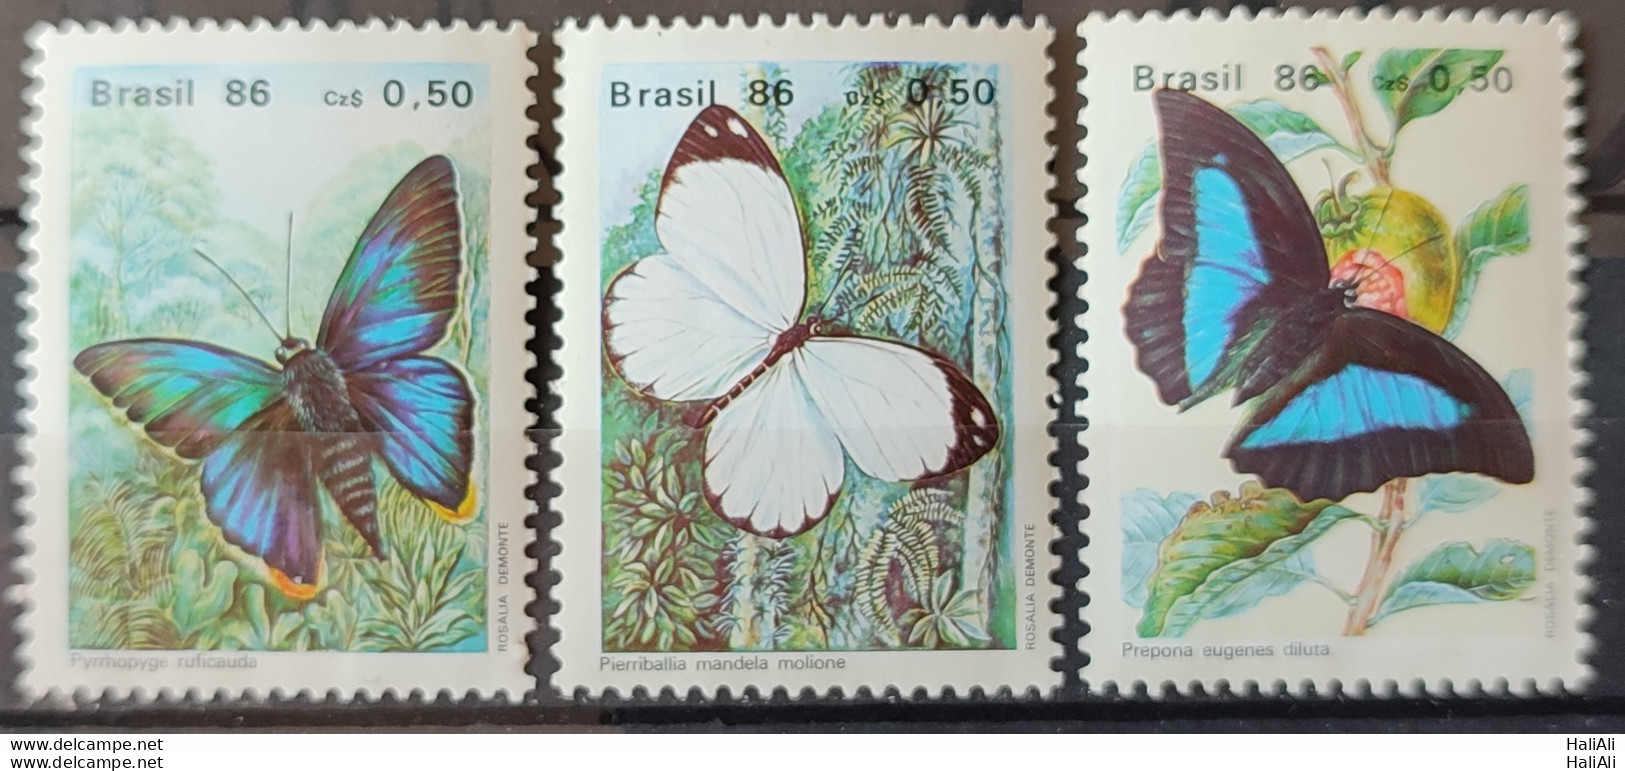 C 1512 Brazil Stamp Butterfly Insects 1986 Complete Series 2.jpg - Ungebraucht